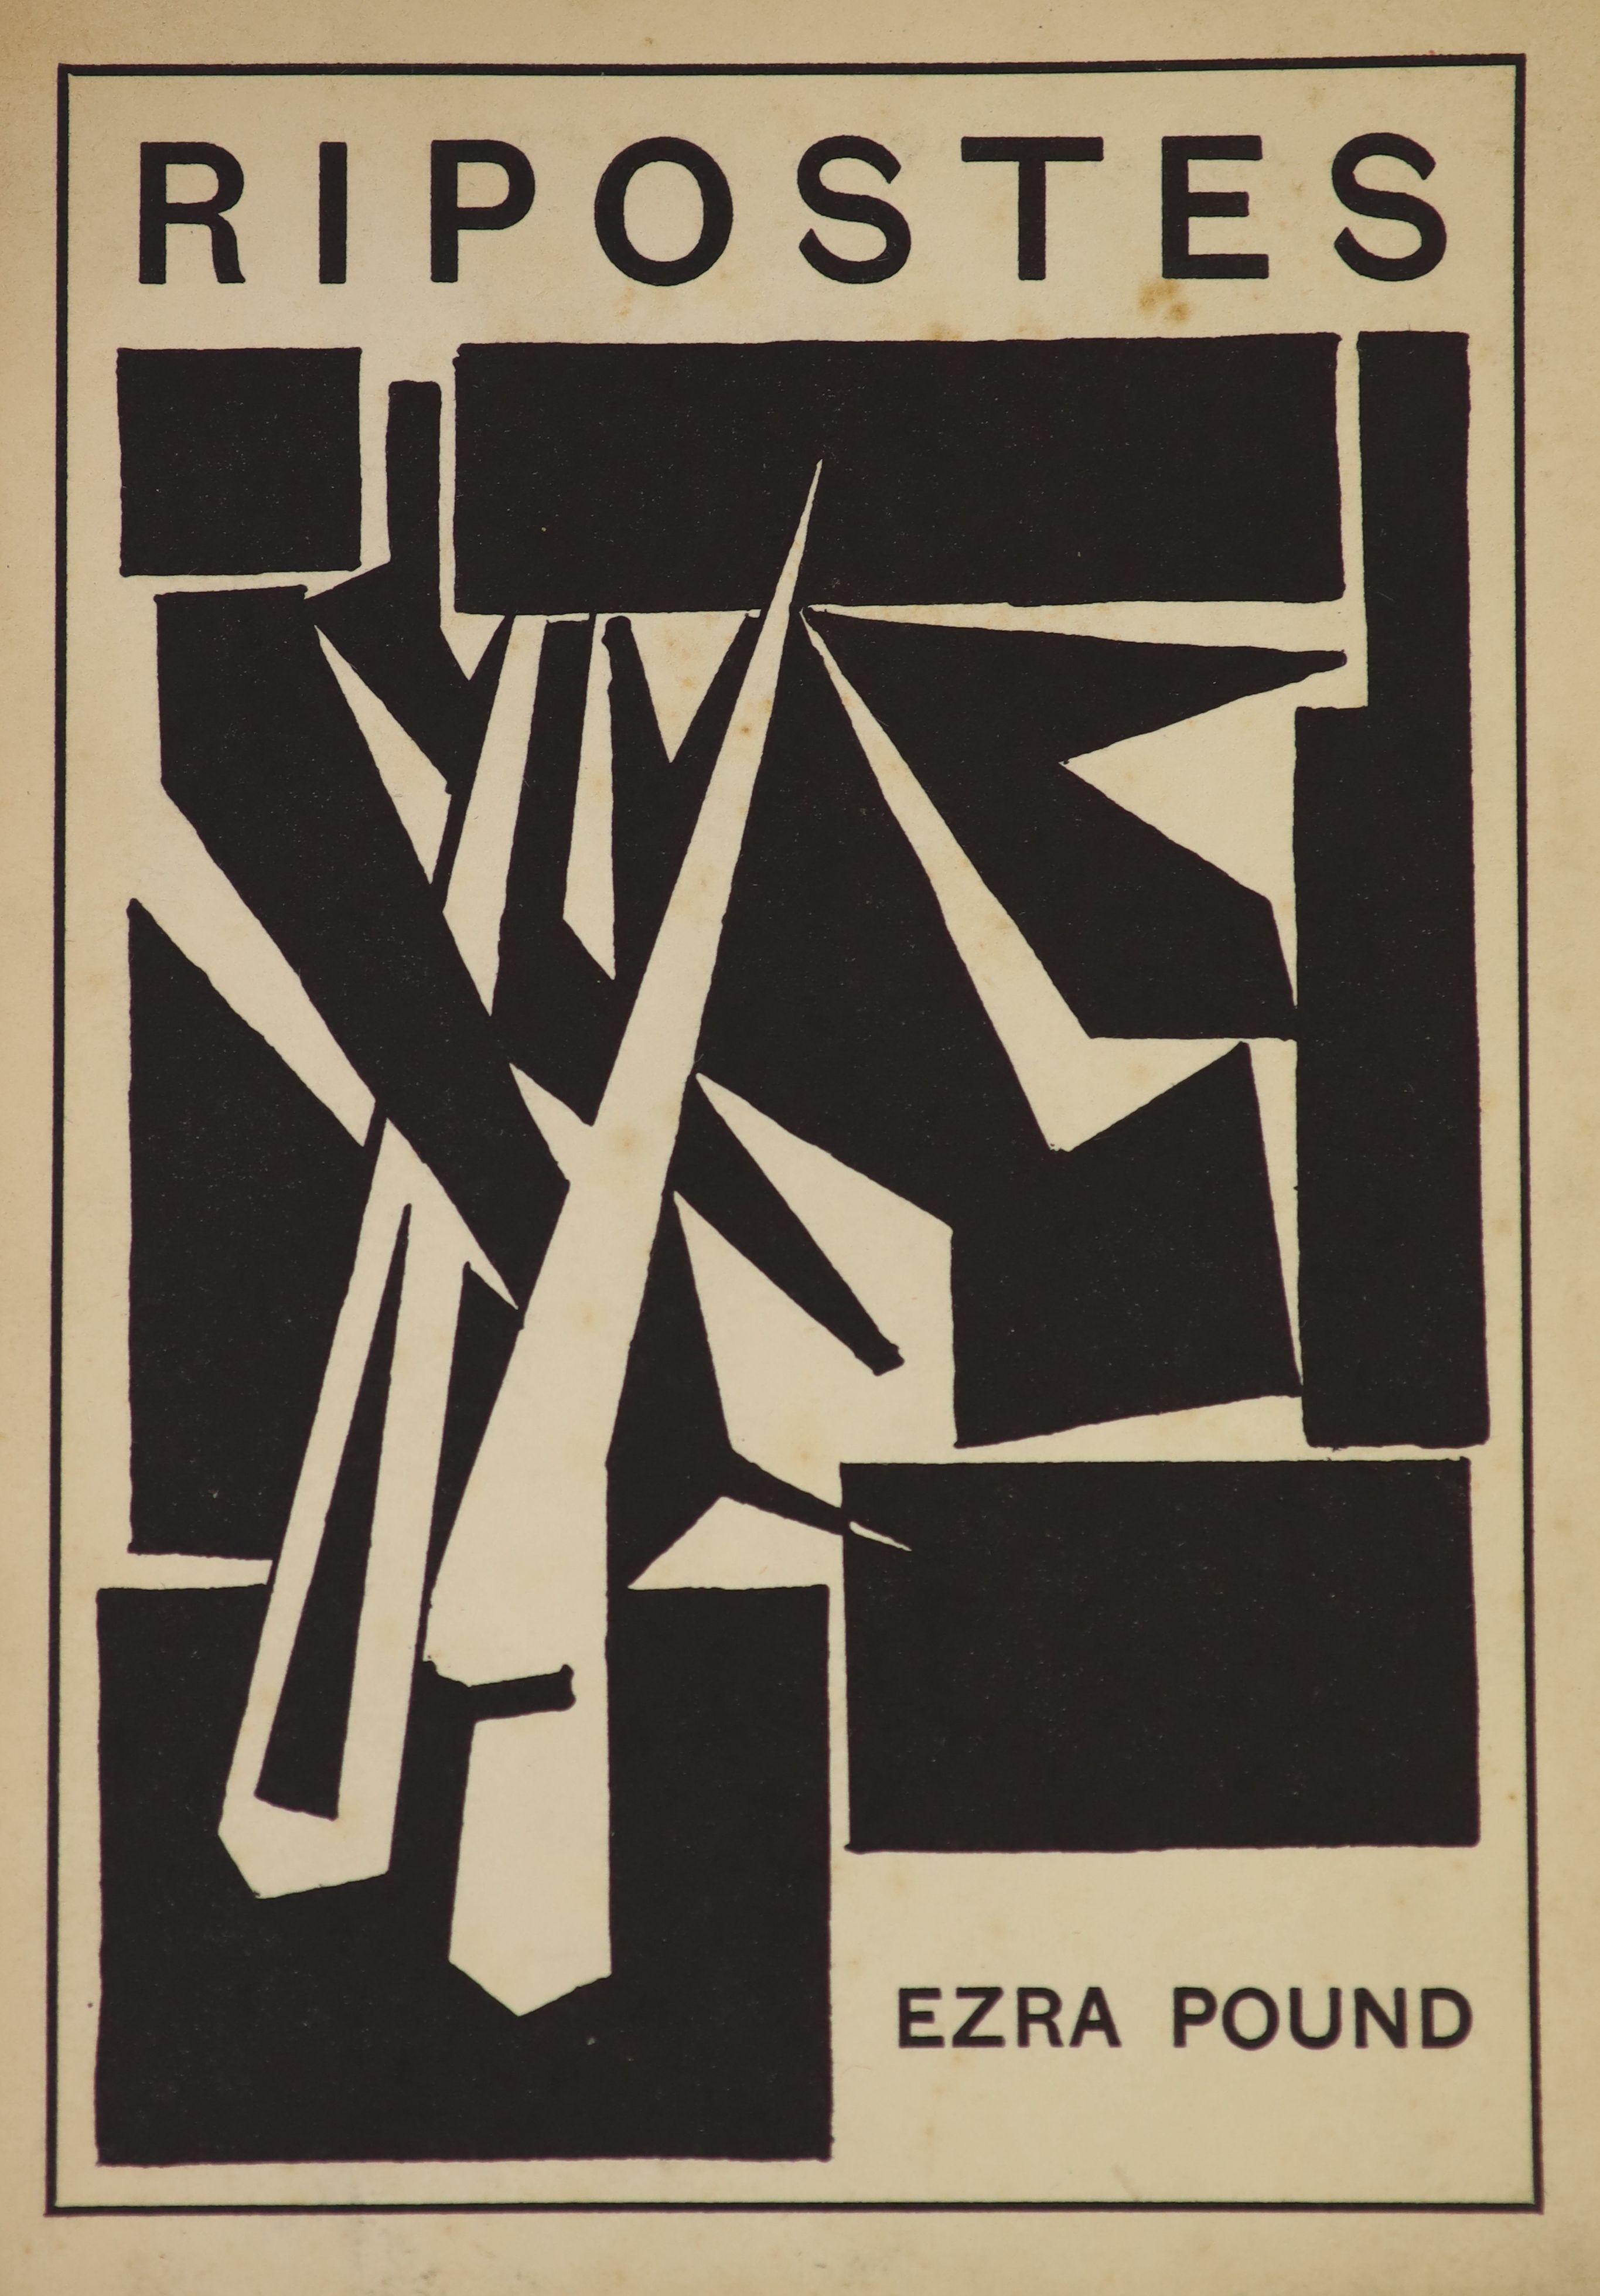 Pound, Ezra - Ripostes, 1st edition, one of 400, papers wrappers, with a Cubist design by Dorothy Pound printed in black, Elkin Mathews, London, 1915